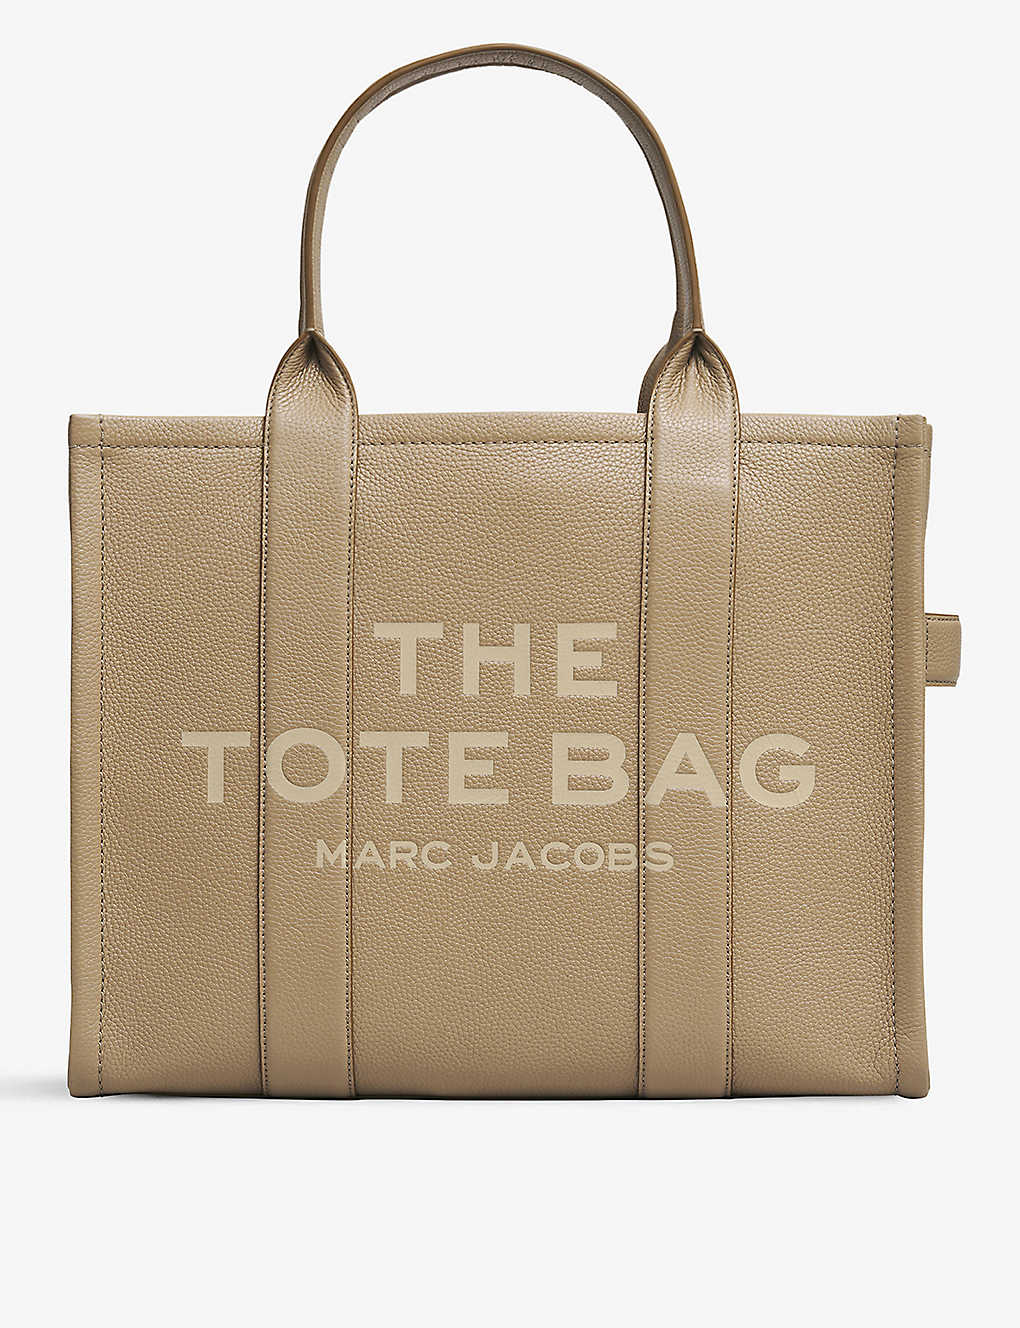 MARC JACOBS - The Tote large leather tote bag | Selfridges.com